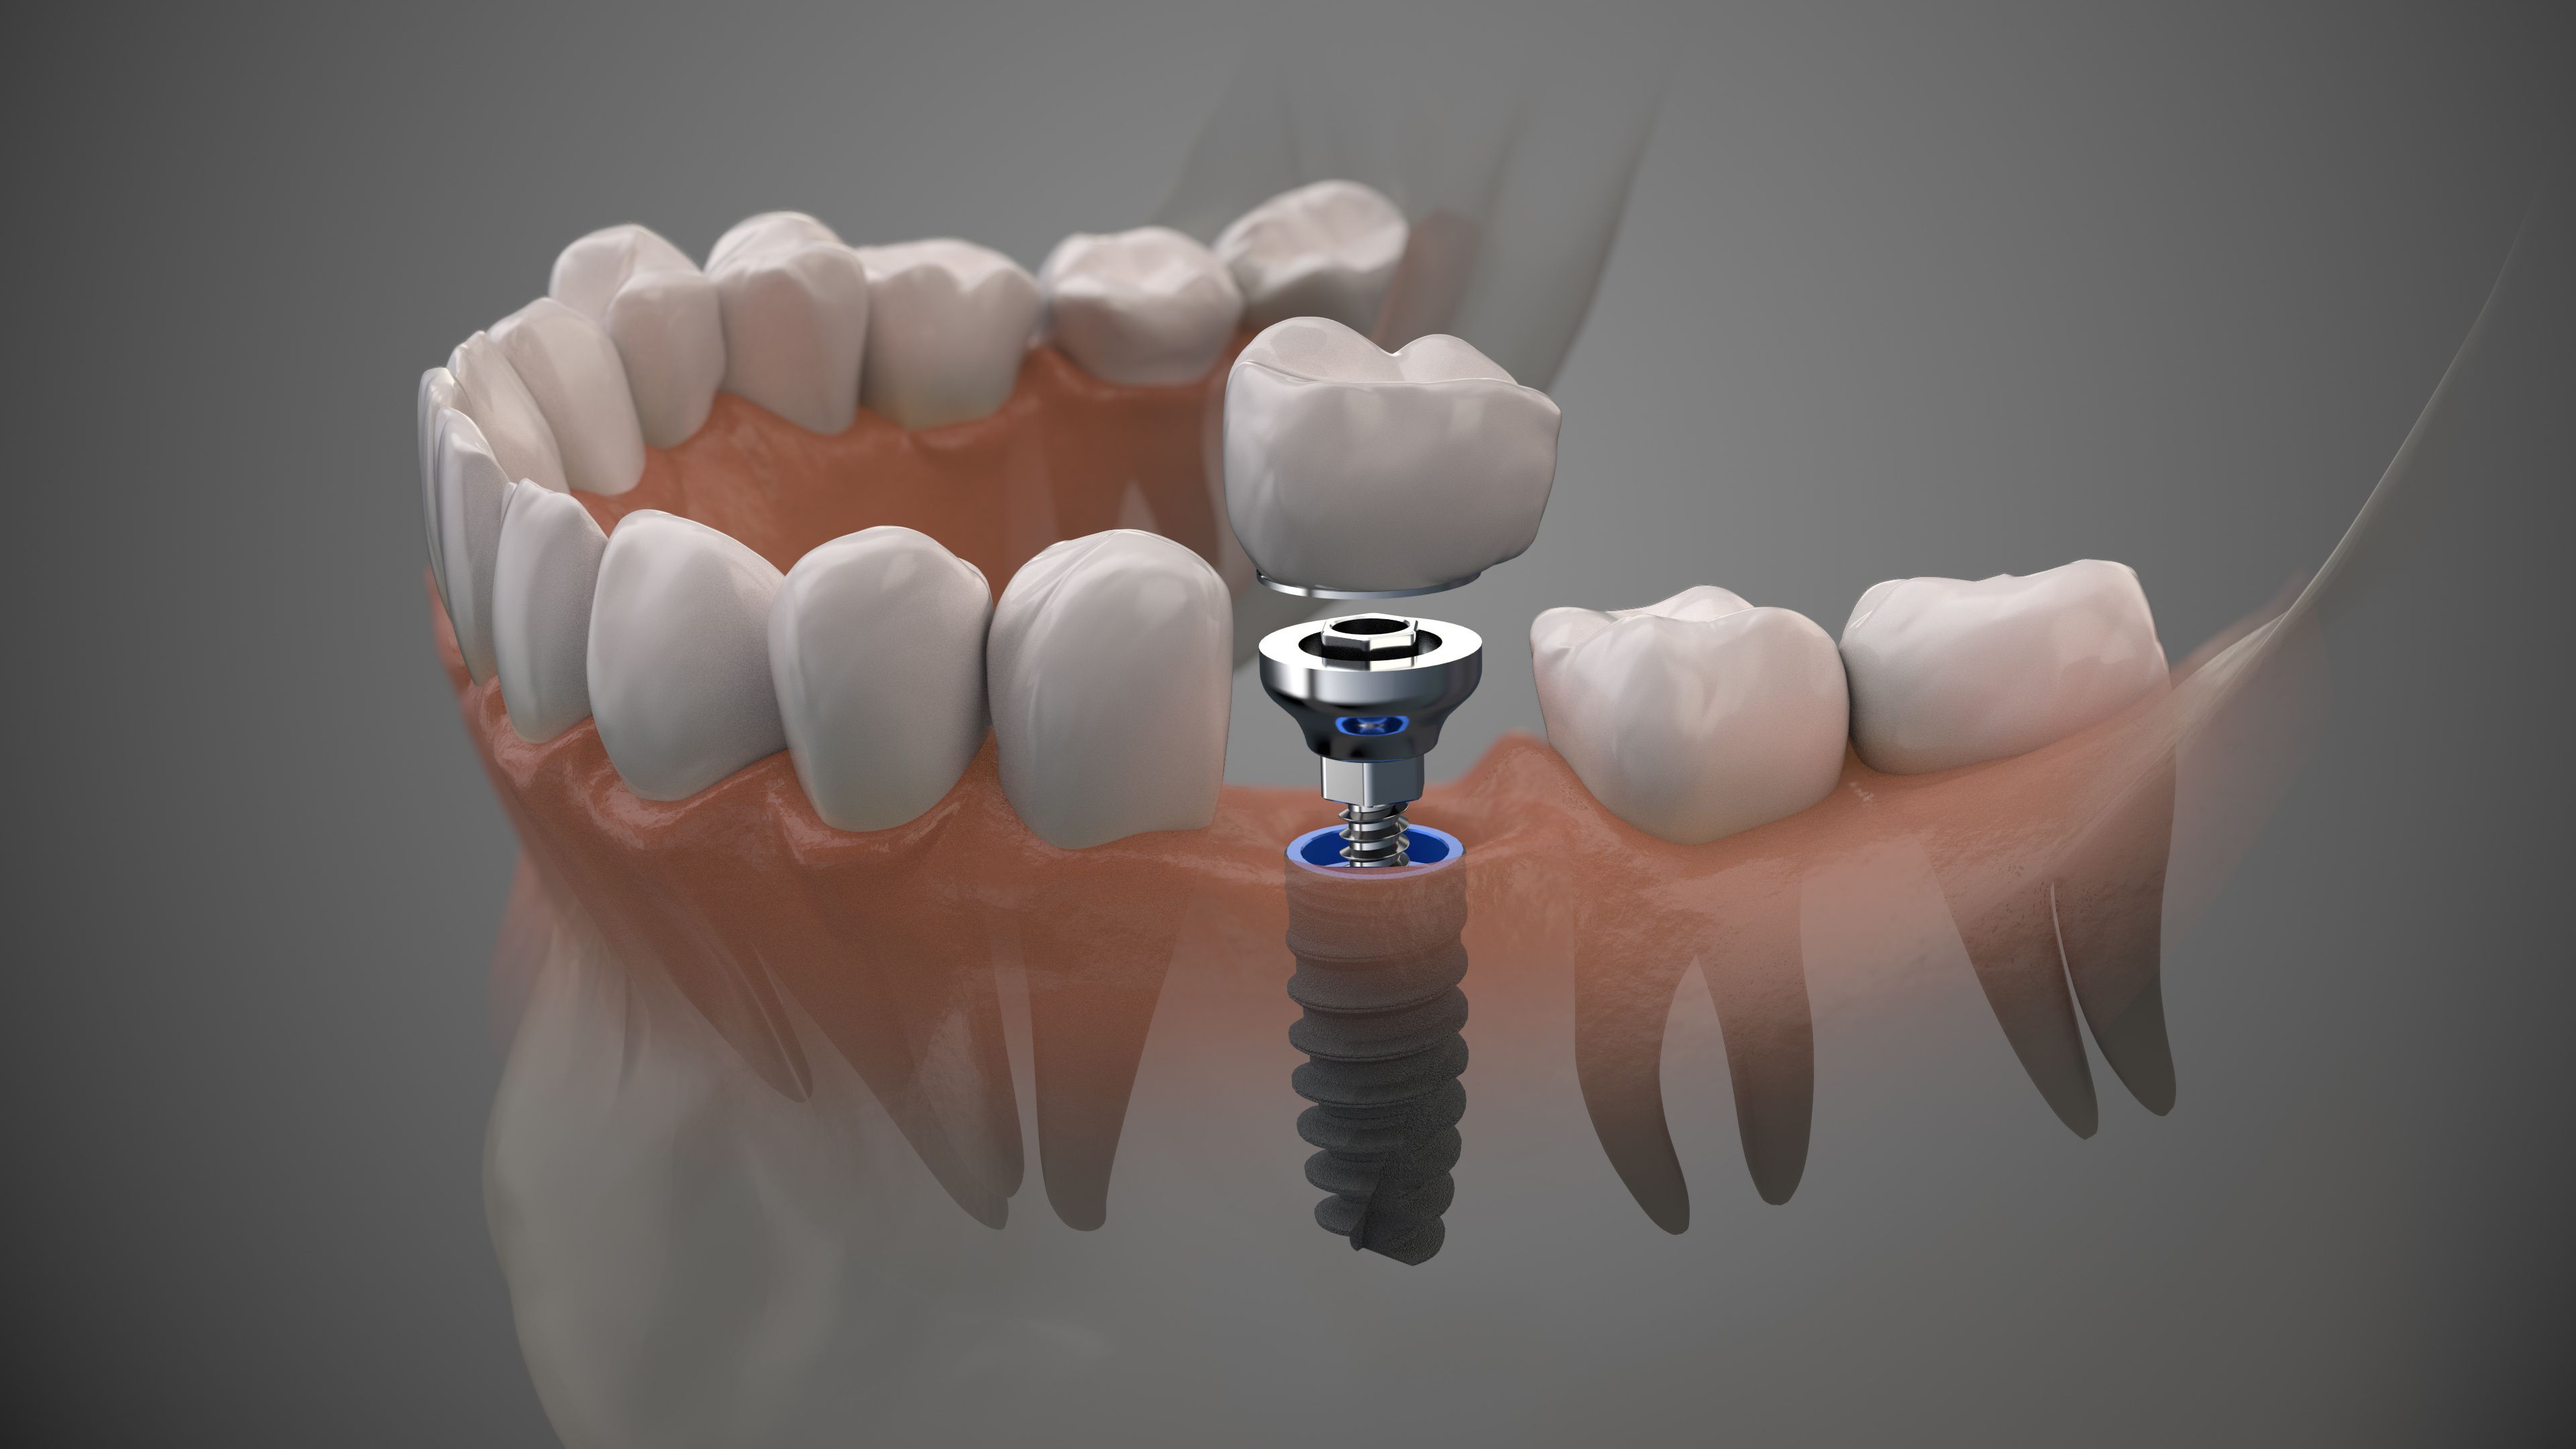 How to choose between cement-retained or screw-retained implants